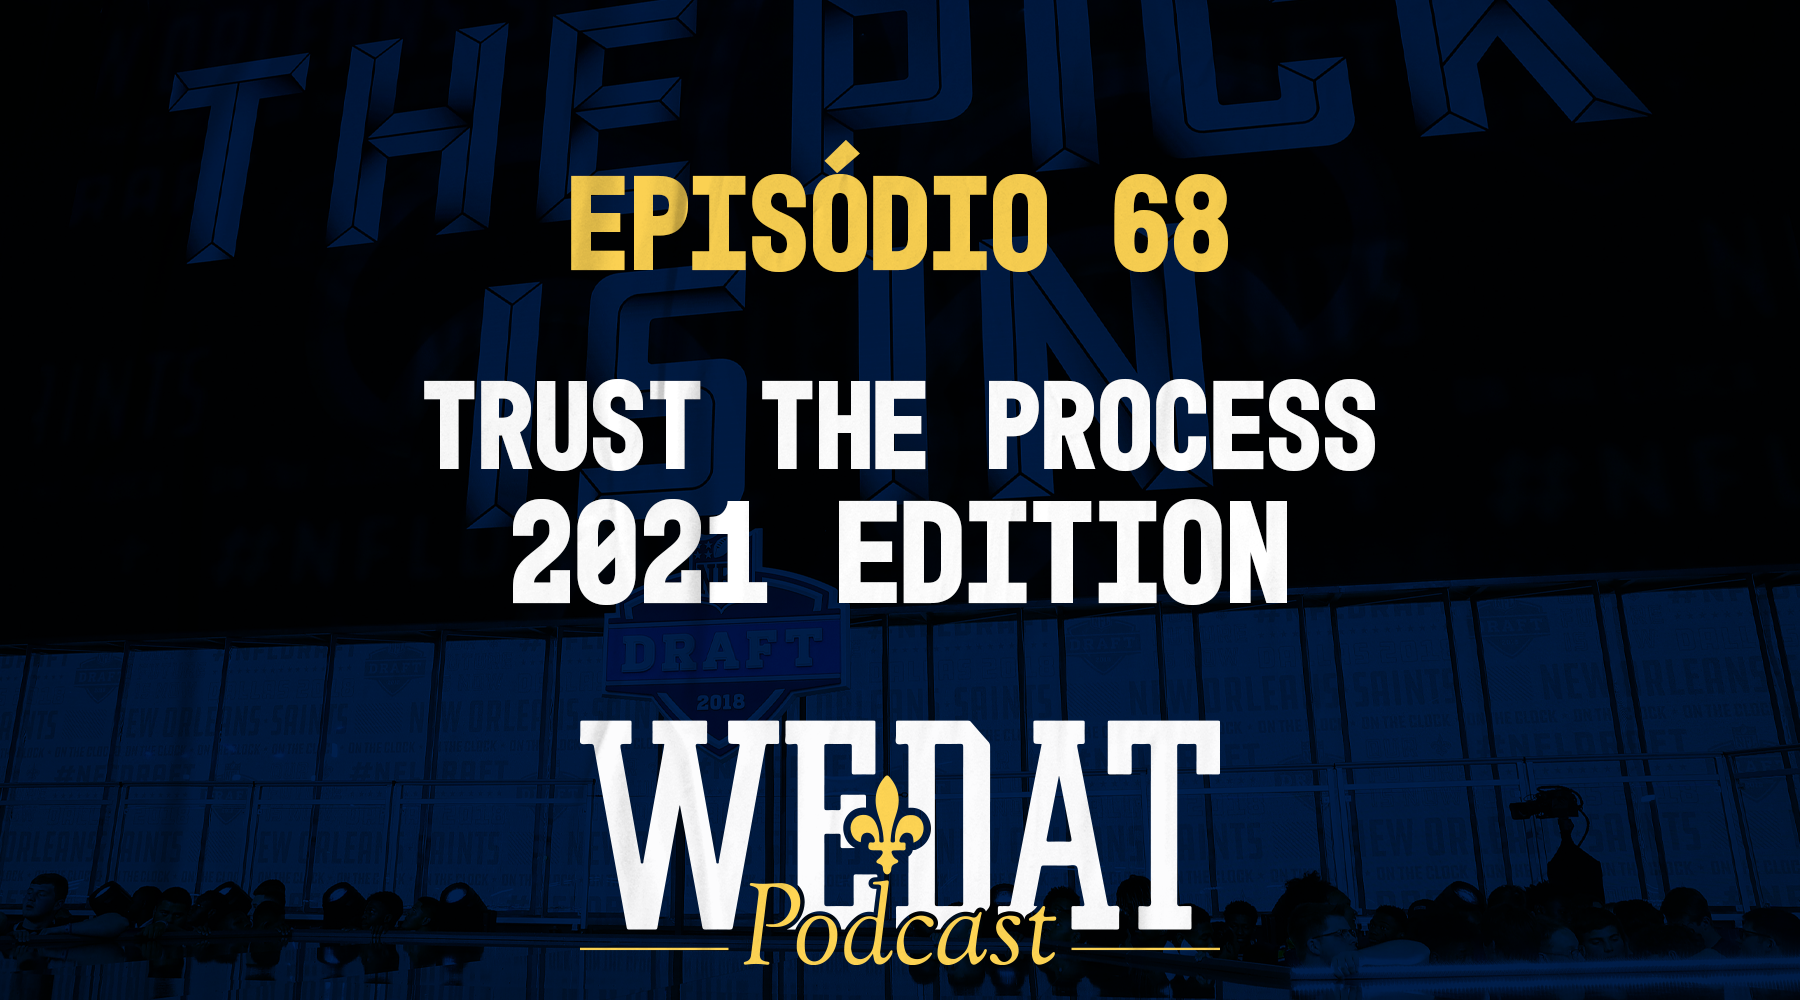 WE DAT PODCAST #68 – Trust The Process – Edition 2021